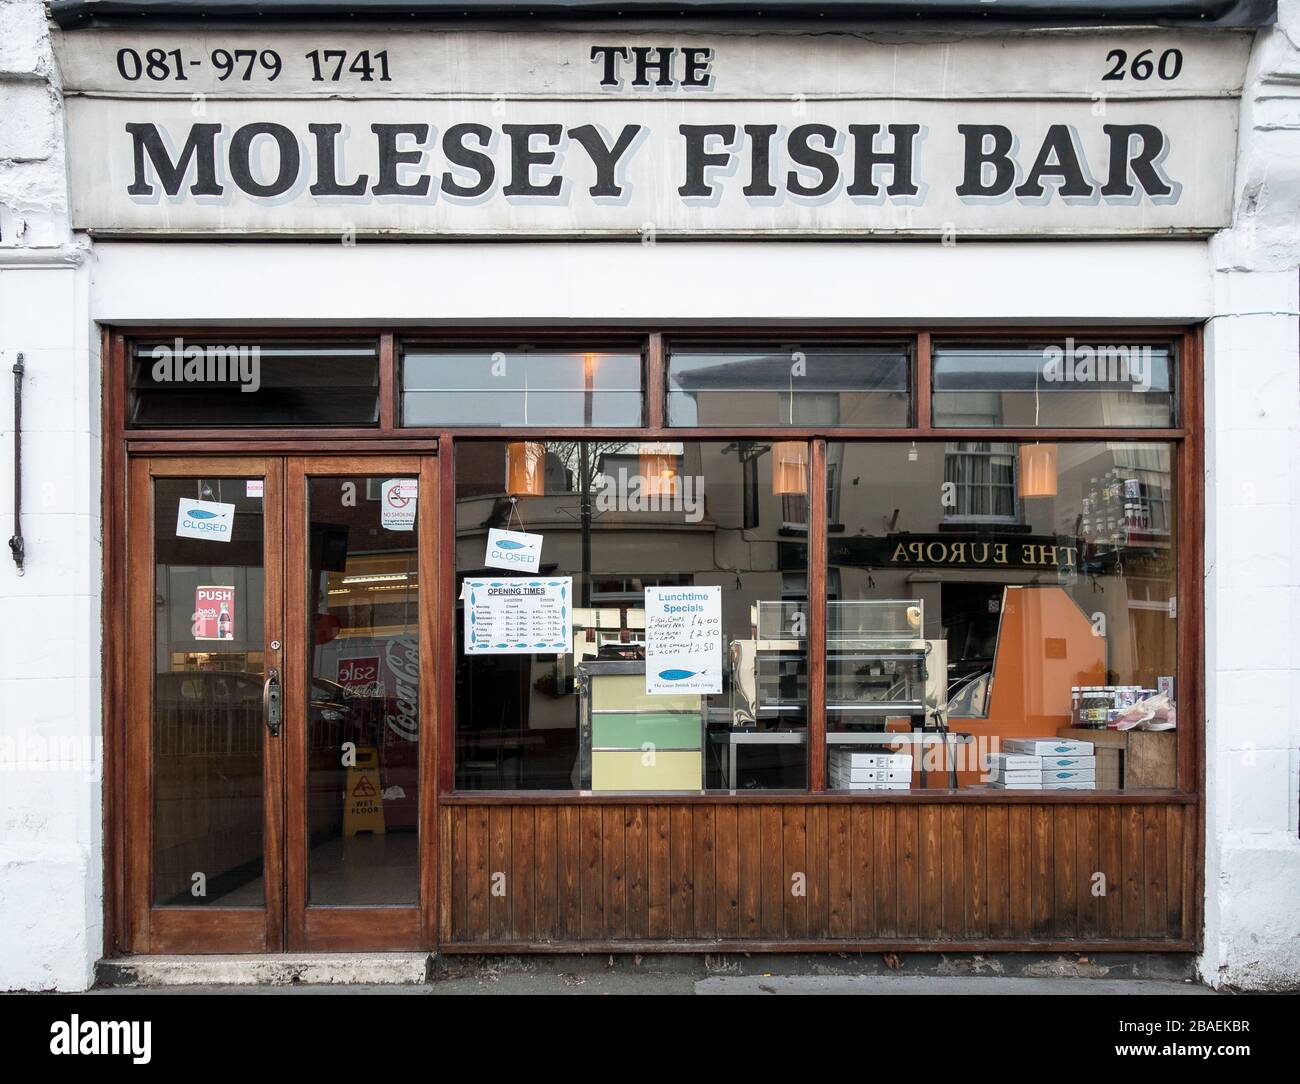 East Molesey, United Kingdom - 19 January, 2015: Molesey Fish Bar, a traditional and popular fish and chip shop in the high street of East Molesey, ab Stock Photo